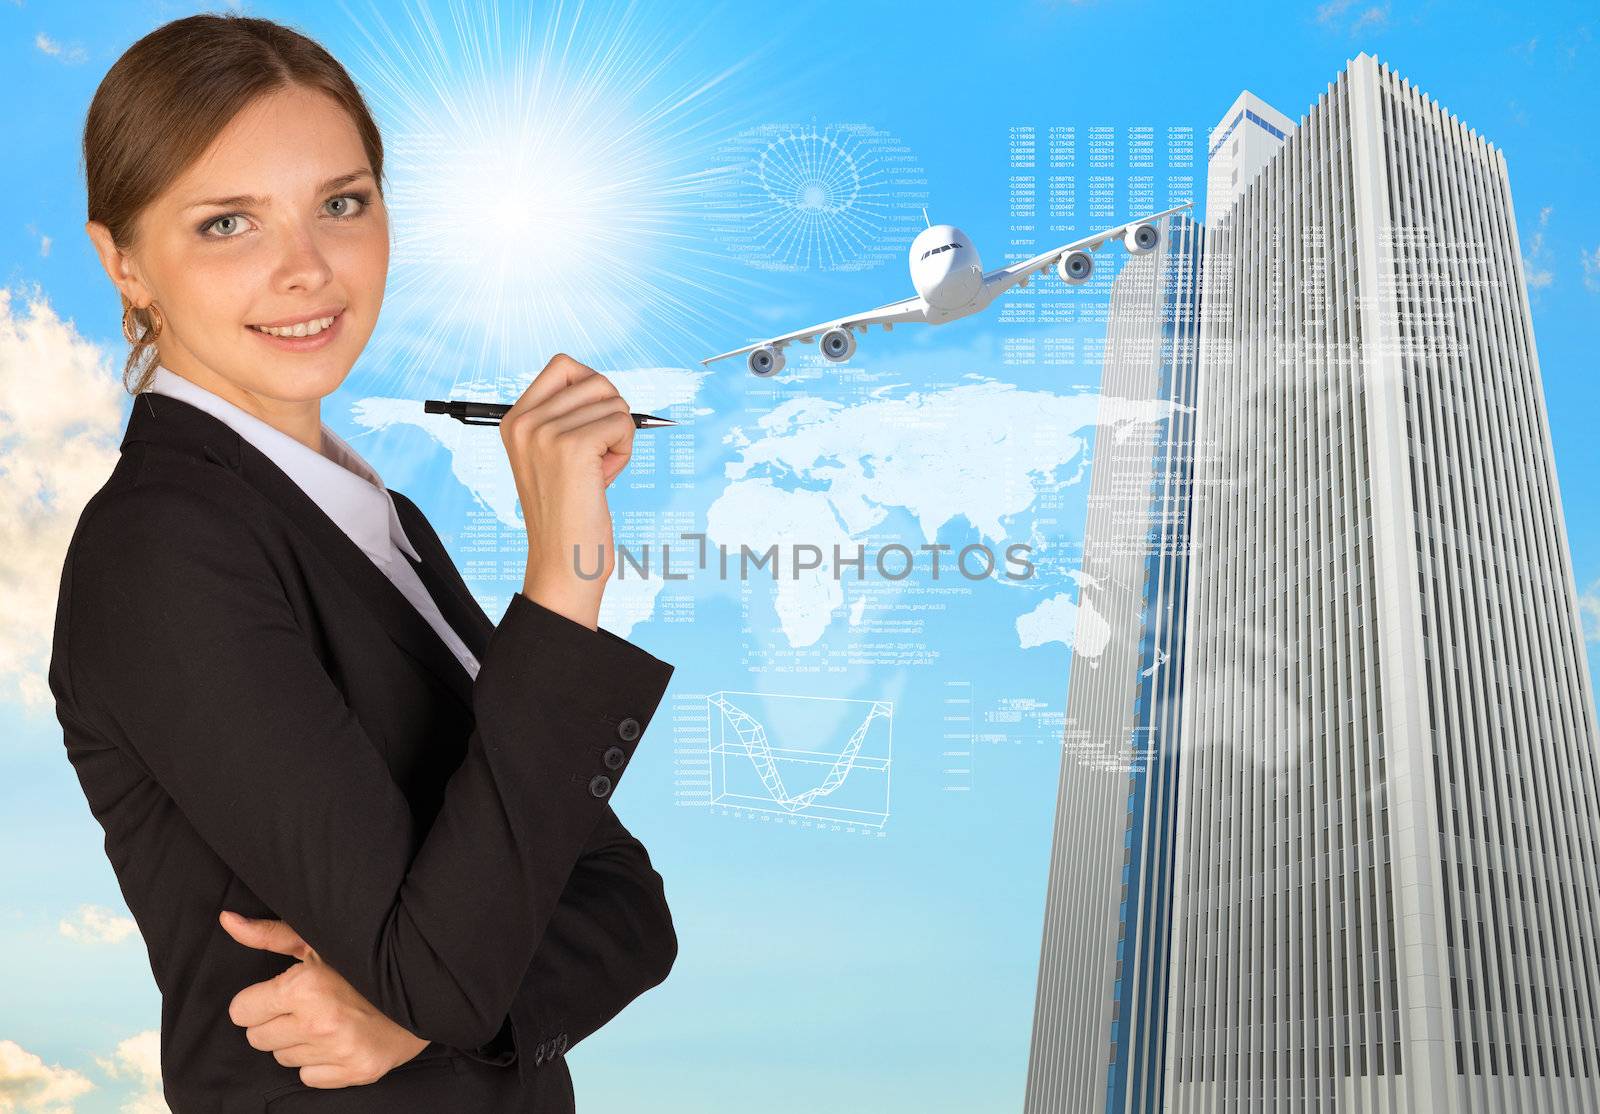 Businesswoman with pen looking at camera. Airplane, skyscrapers and world map as backdrop